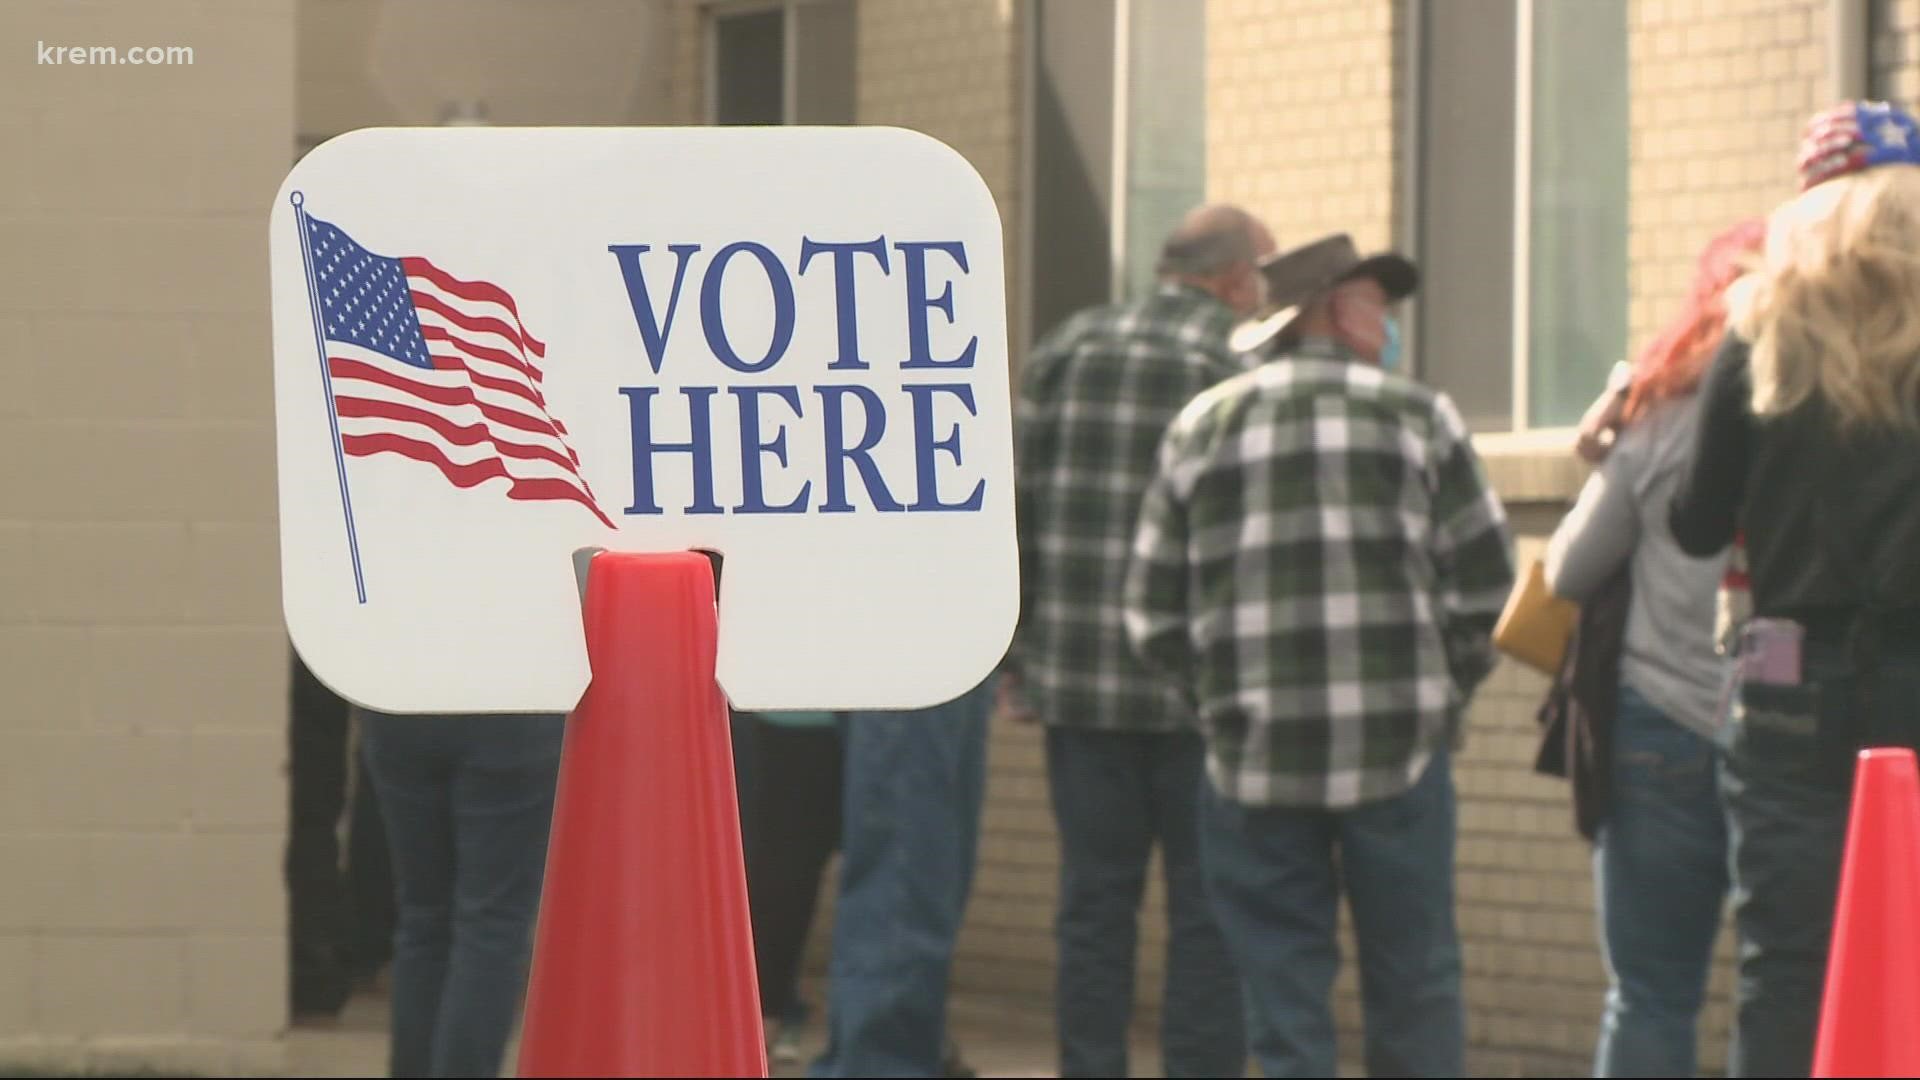 Ahead of in-person and absentee voting, here's everything voters need to know before casting their ballot.